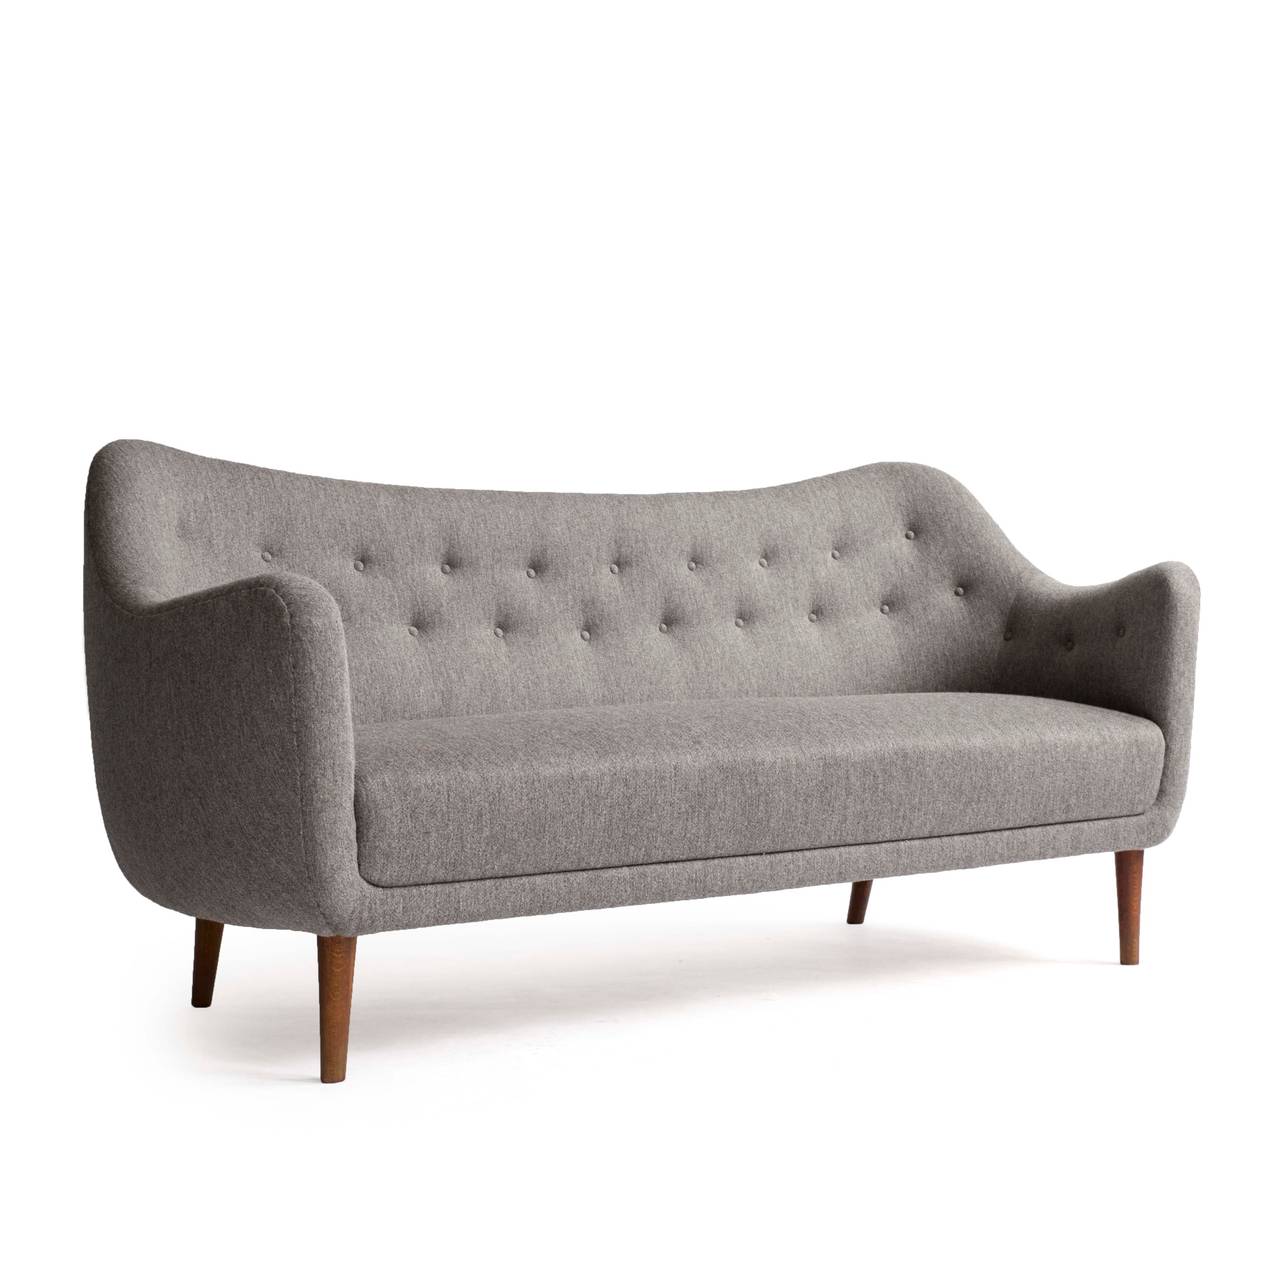 Finn Juhl 2, 5 - 3 person sofa upholstered with grey wool, tapering legs of stained beech. 

Designed by Finn Juhl 1948 and manufactured in the 1950s by Bovirke Denmark, model BO64. 

A rare sofa in excellent condition.